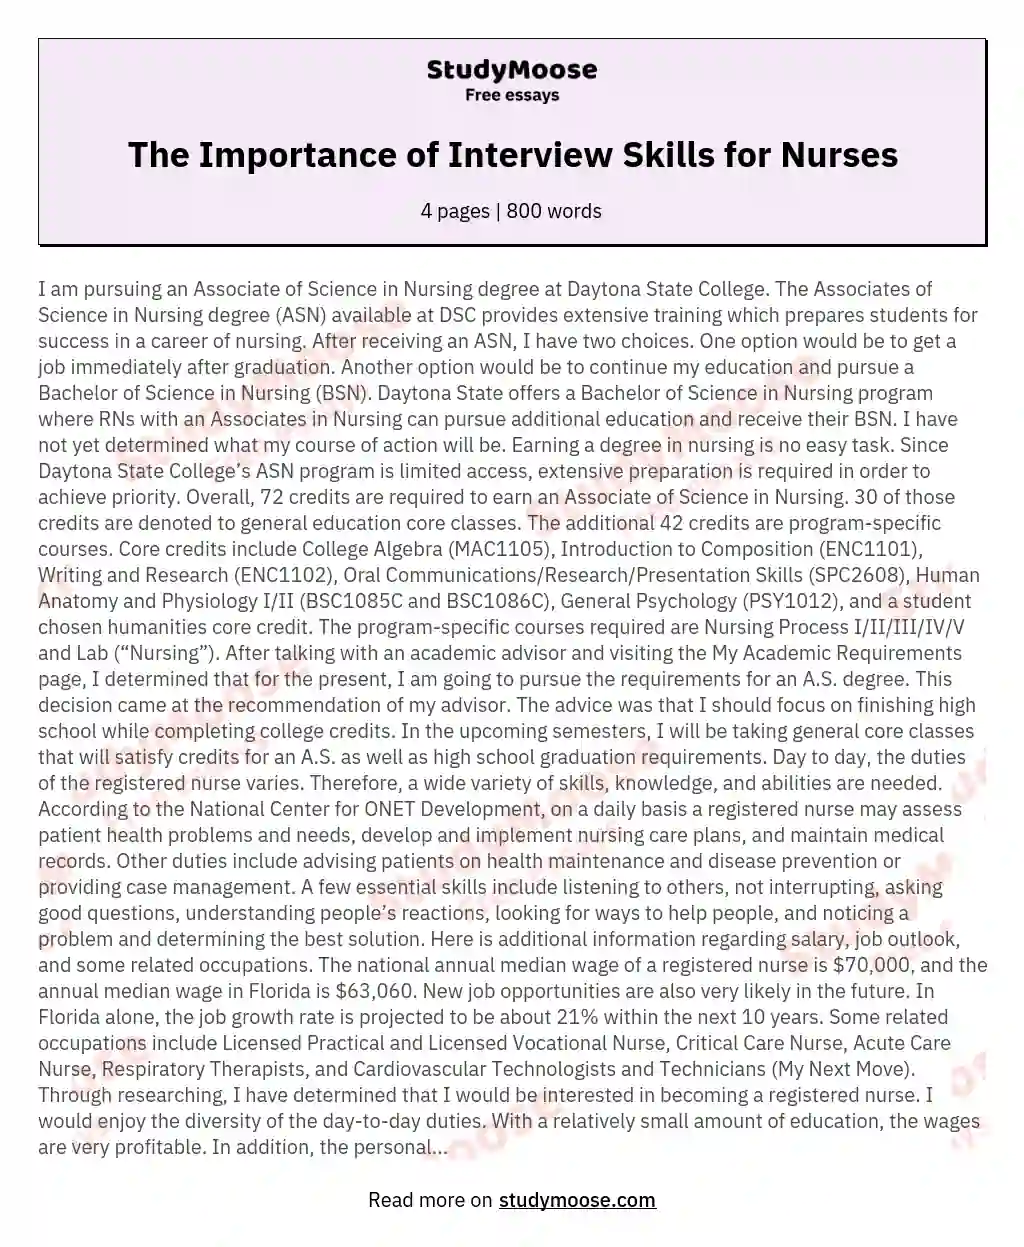 The Importance of Interview Skills for Nurses essay